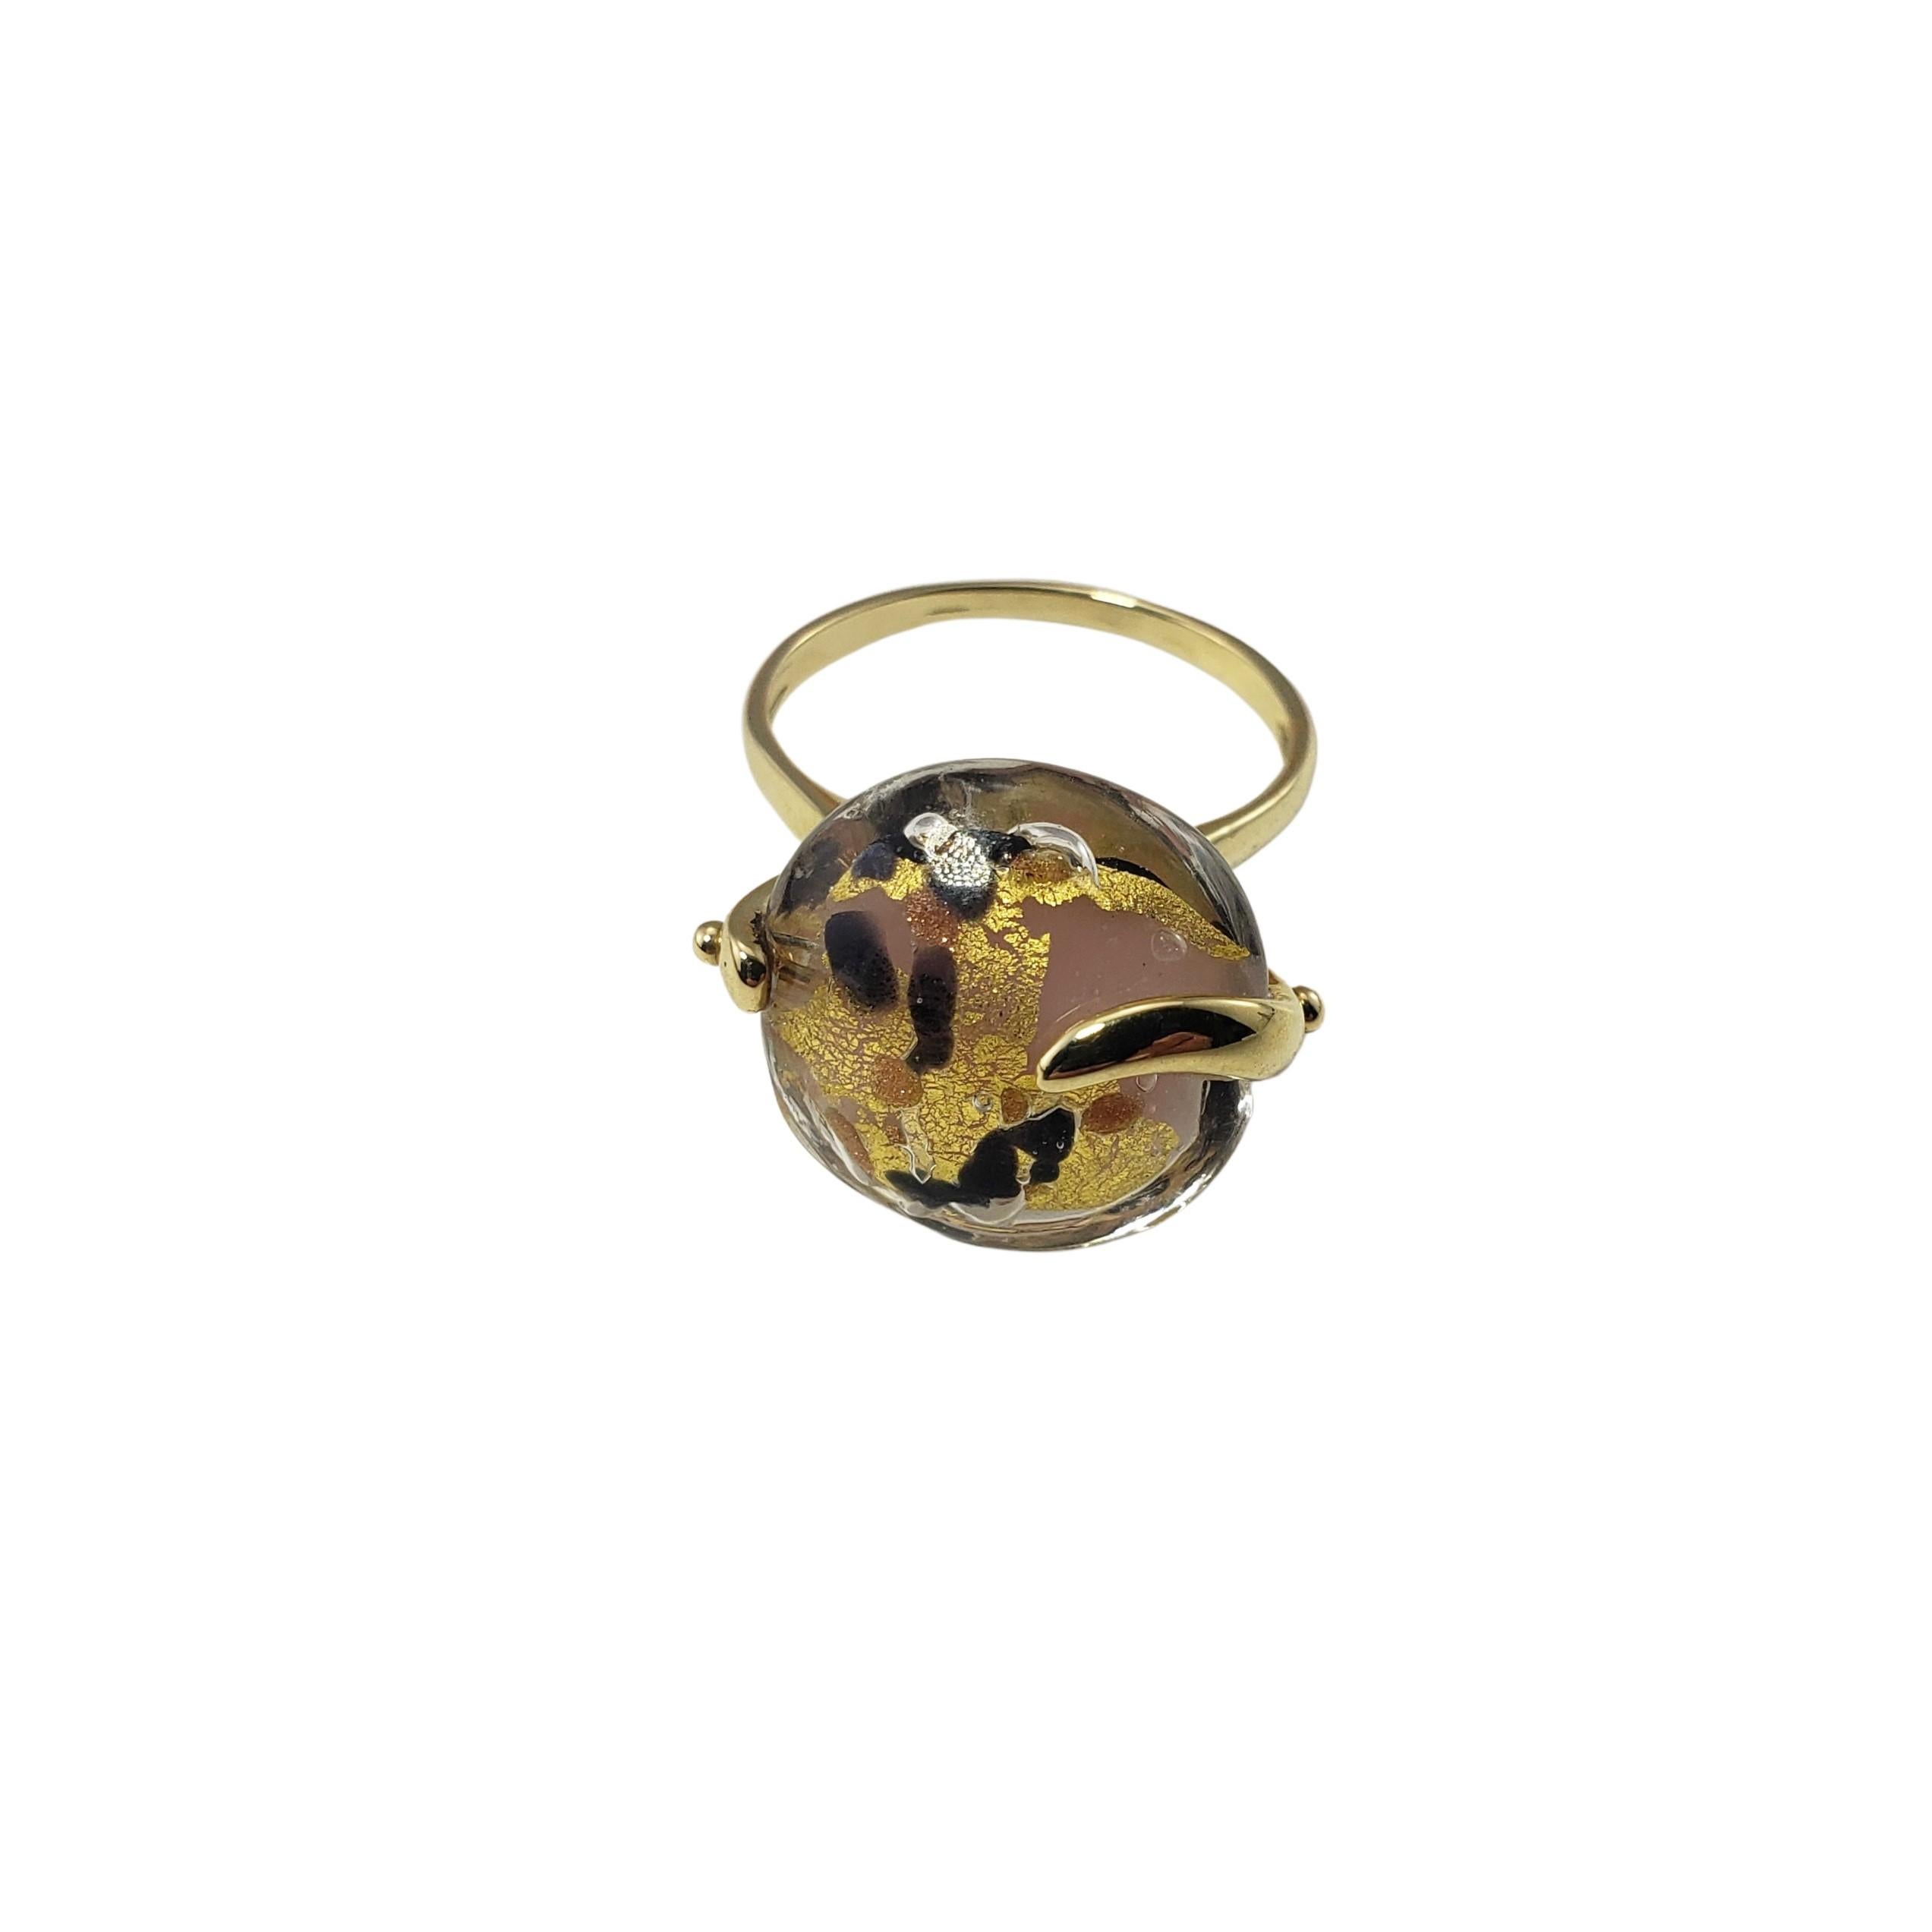 14 Karat Yellow Gold and Glass Stone Ring Size 8-

This lovely ring features one iridescent glass stone set in beautifully detailed 14K yellow gold.  Top of ring measures 15 mm.  Shank:  2 mm.

Size: 8

Weight:  3.0 dwt./  4.8  gr.

Tested for 14K